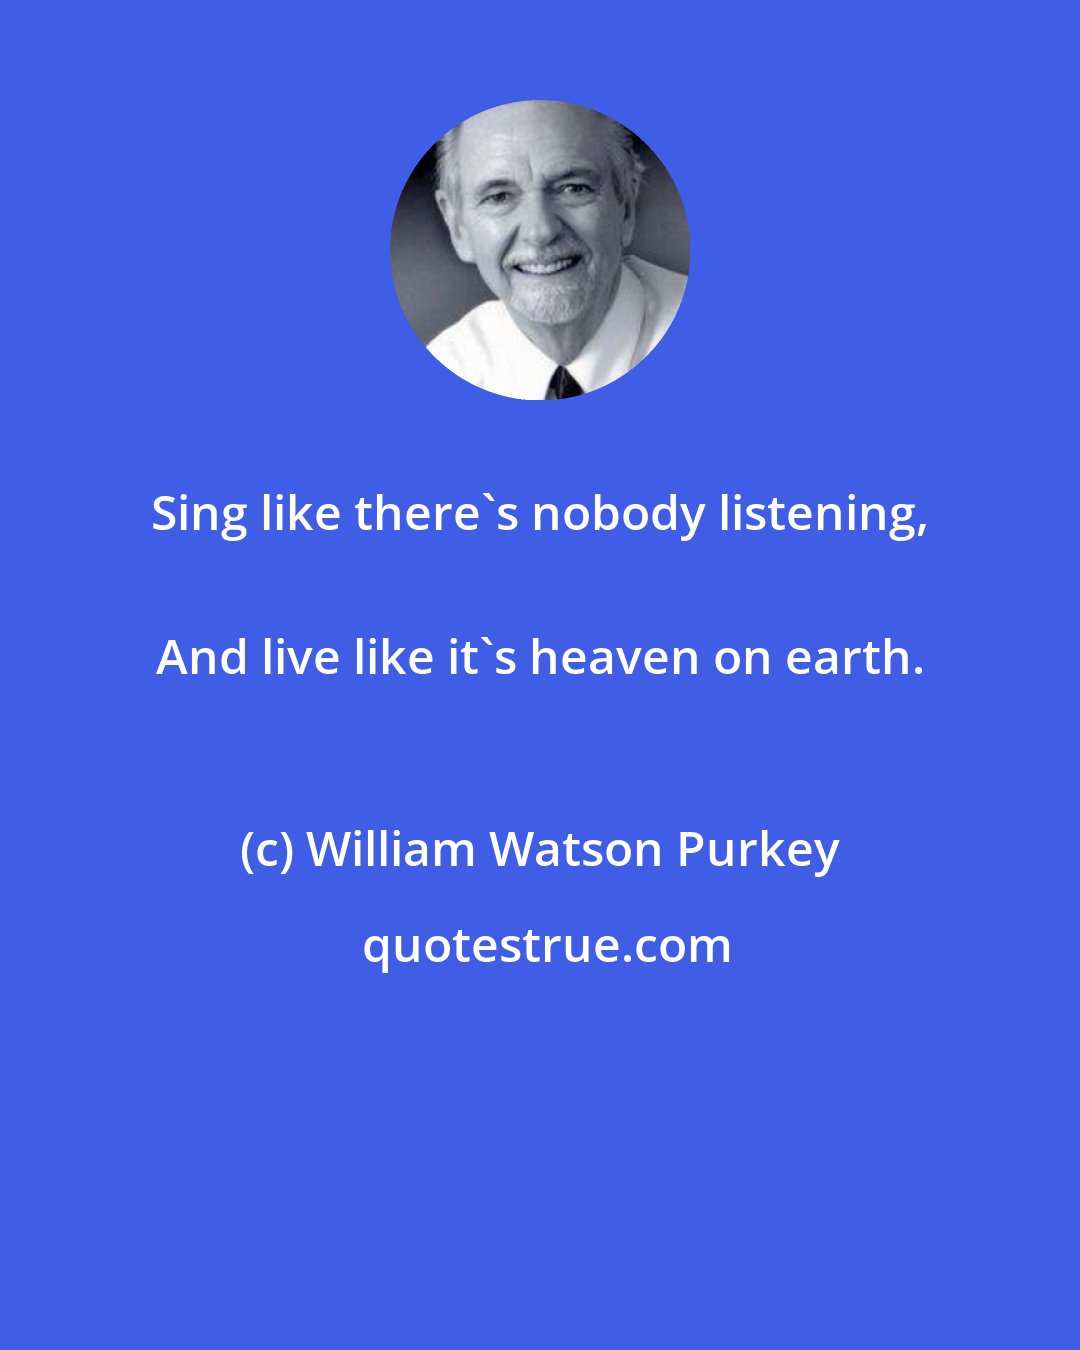 William Watson Purkey: Sing like there's nobody listening, 
 And live like it's heaven on earth.